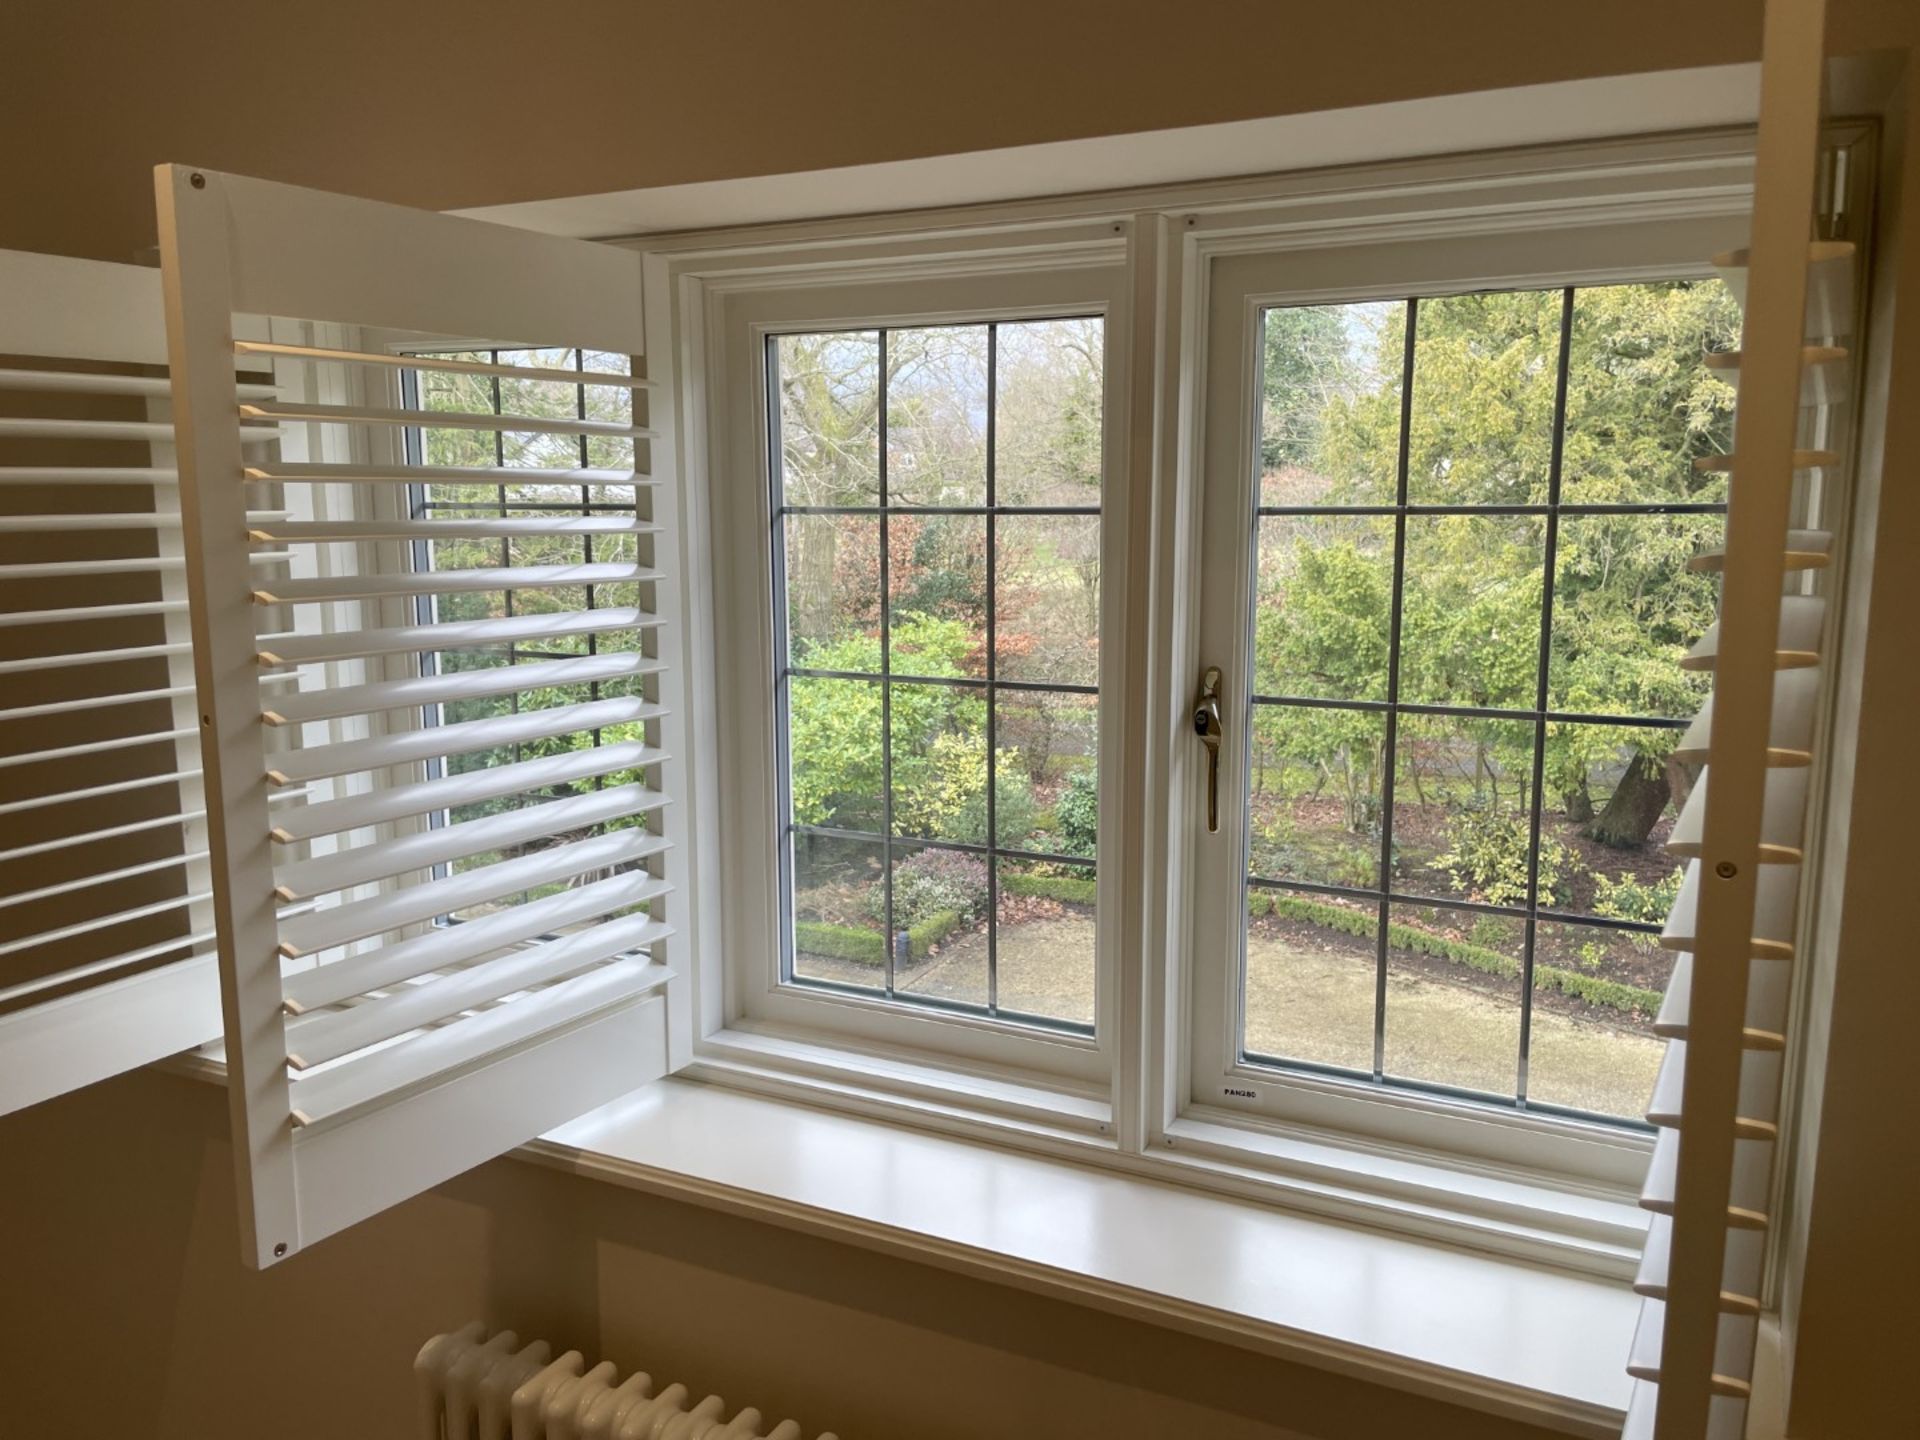 1 x Hardwood Timber Double Glazed Leaded 3-Pane Window Frame fitted with Shutter Blinds - Image 9 of 17